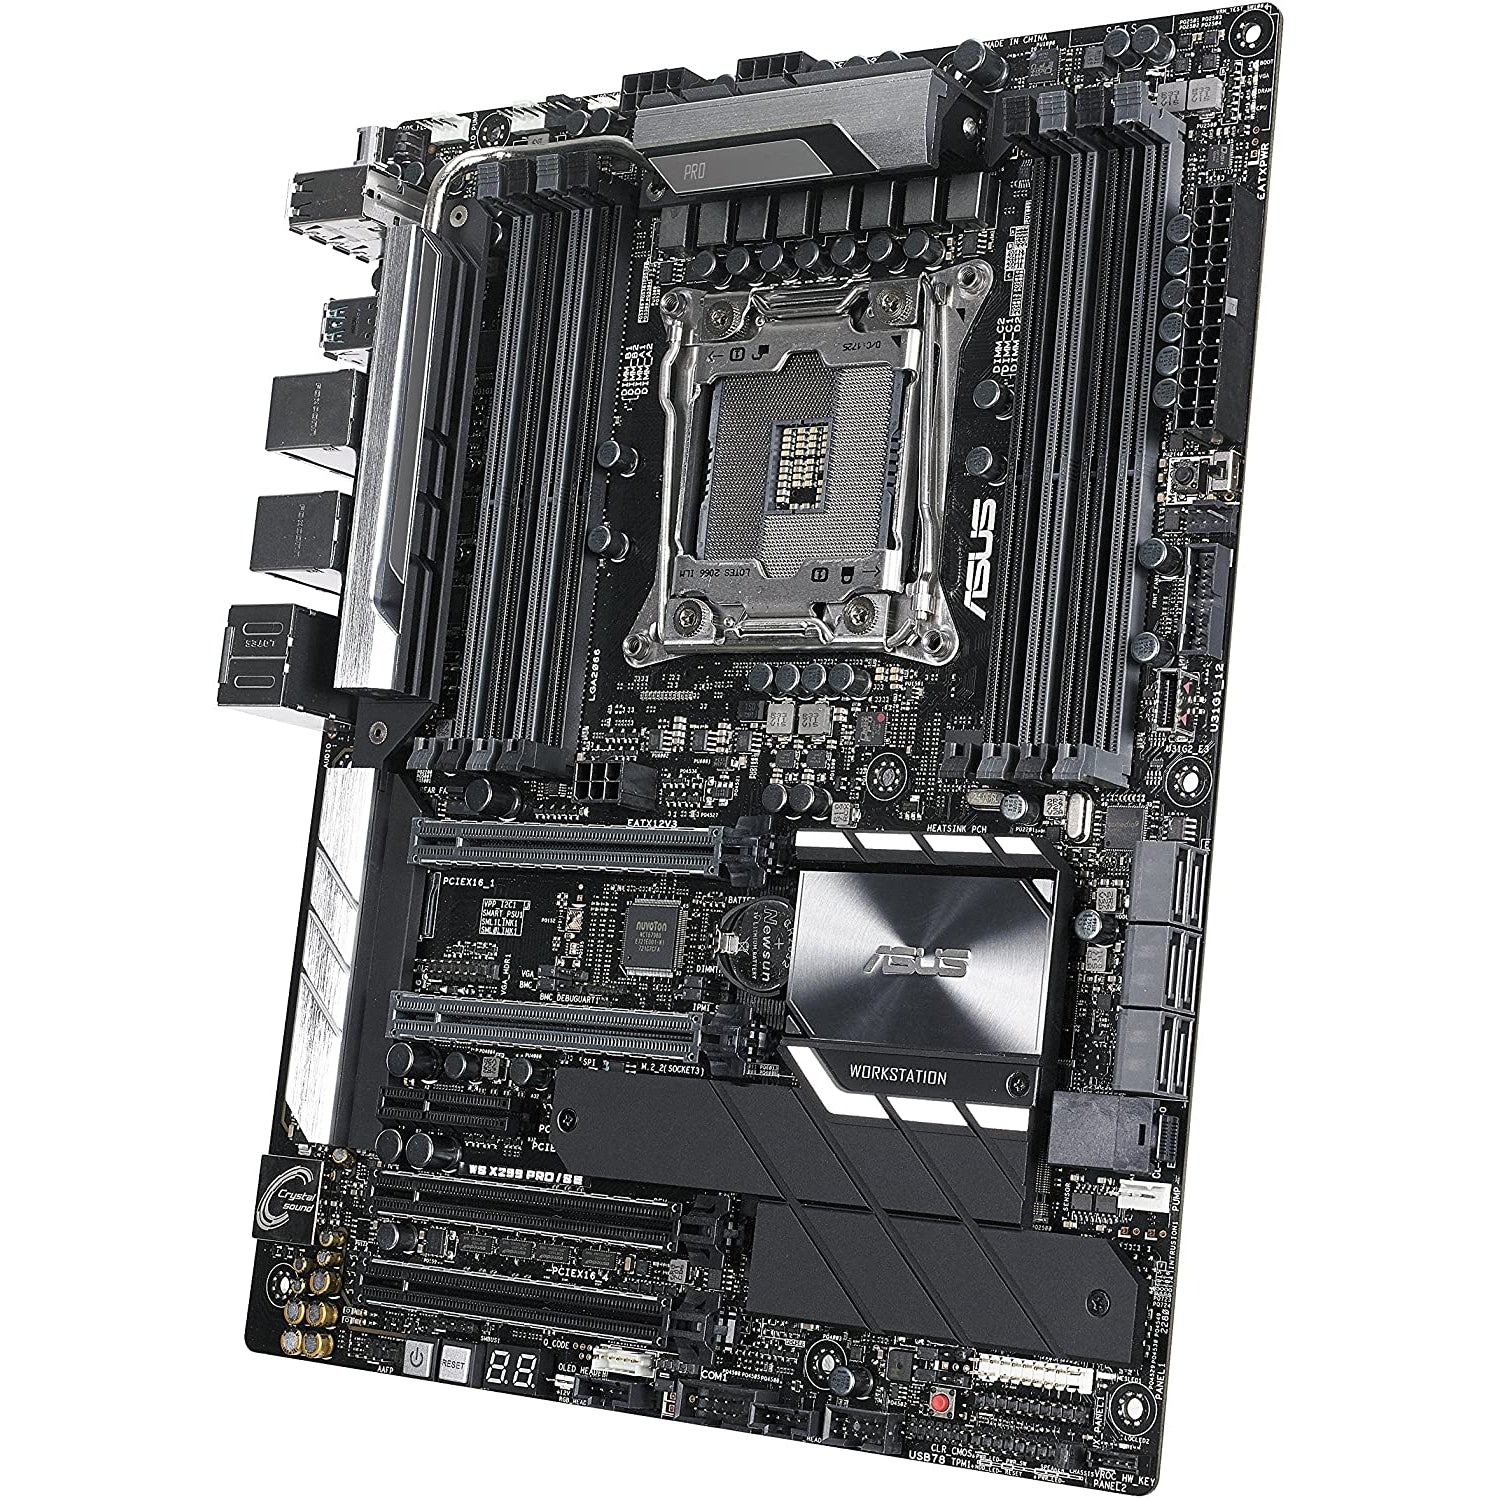 ASUS WS X299 PRO/SE 2066 Intel X299 ATX Workstation Motherboard 90SW00A0-M0EAY0